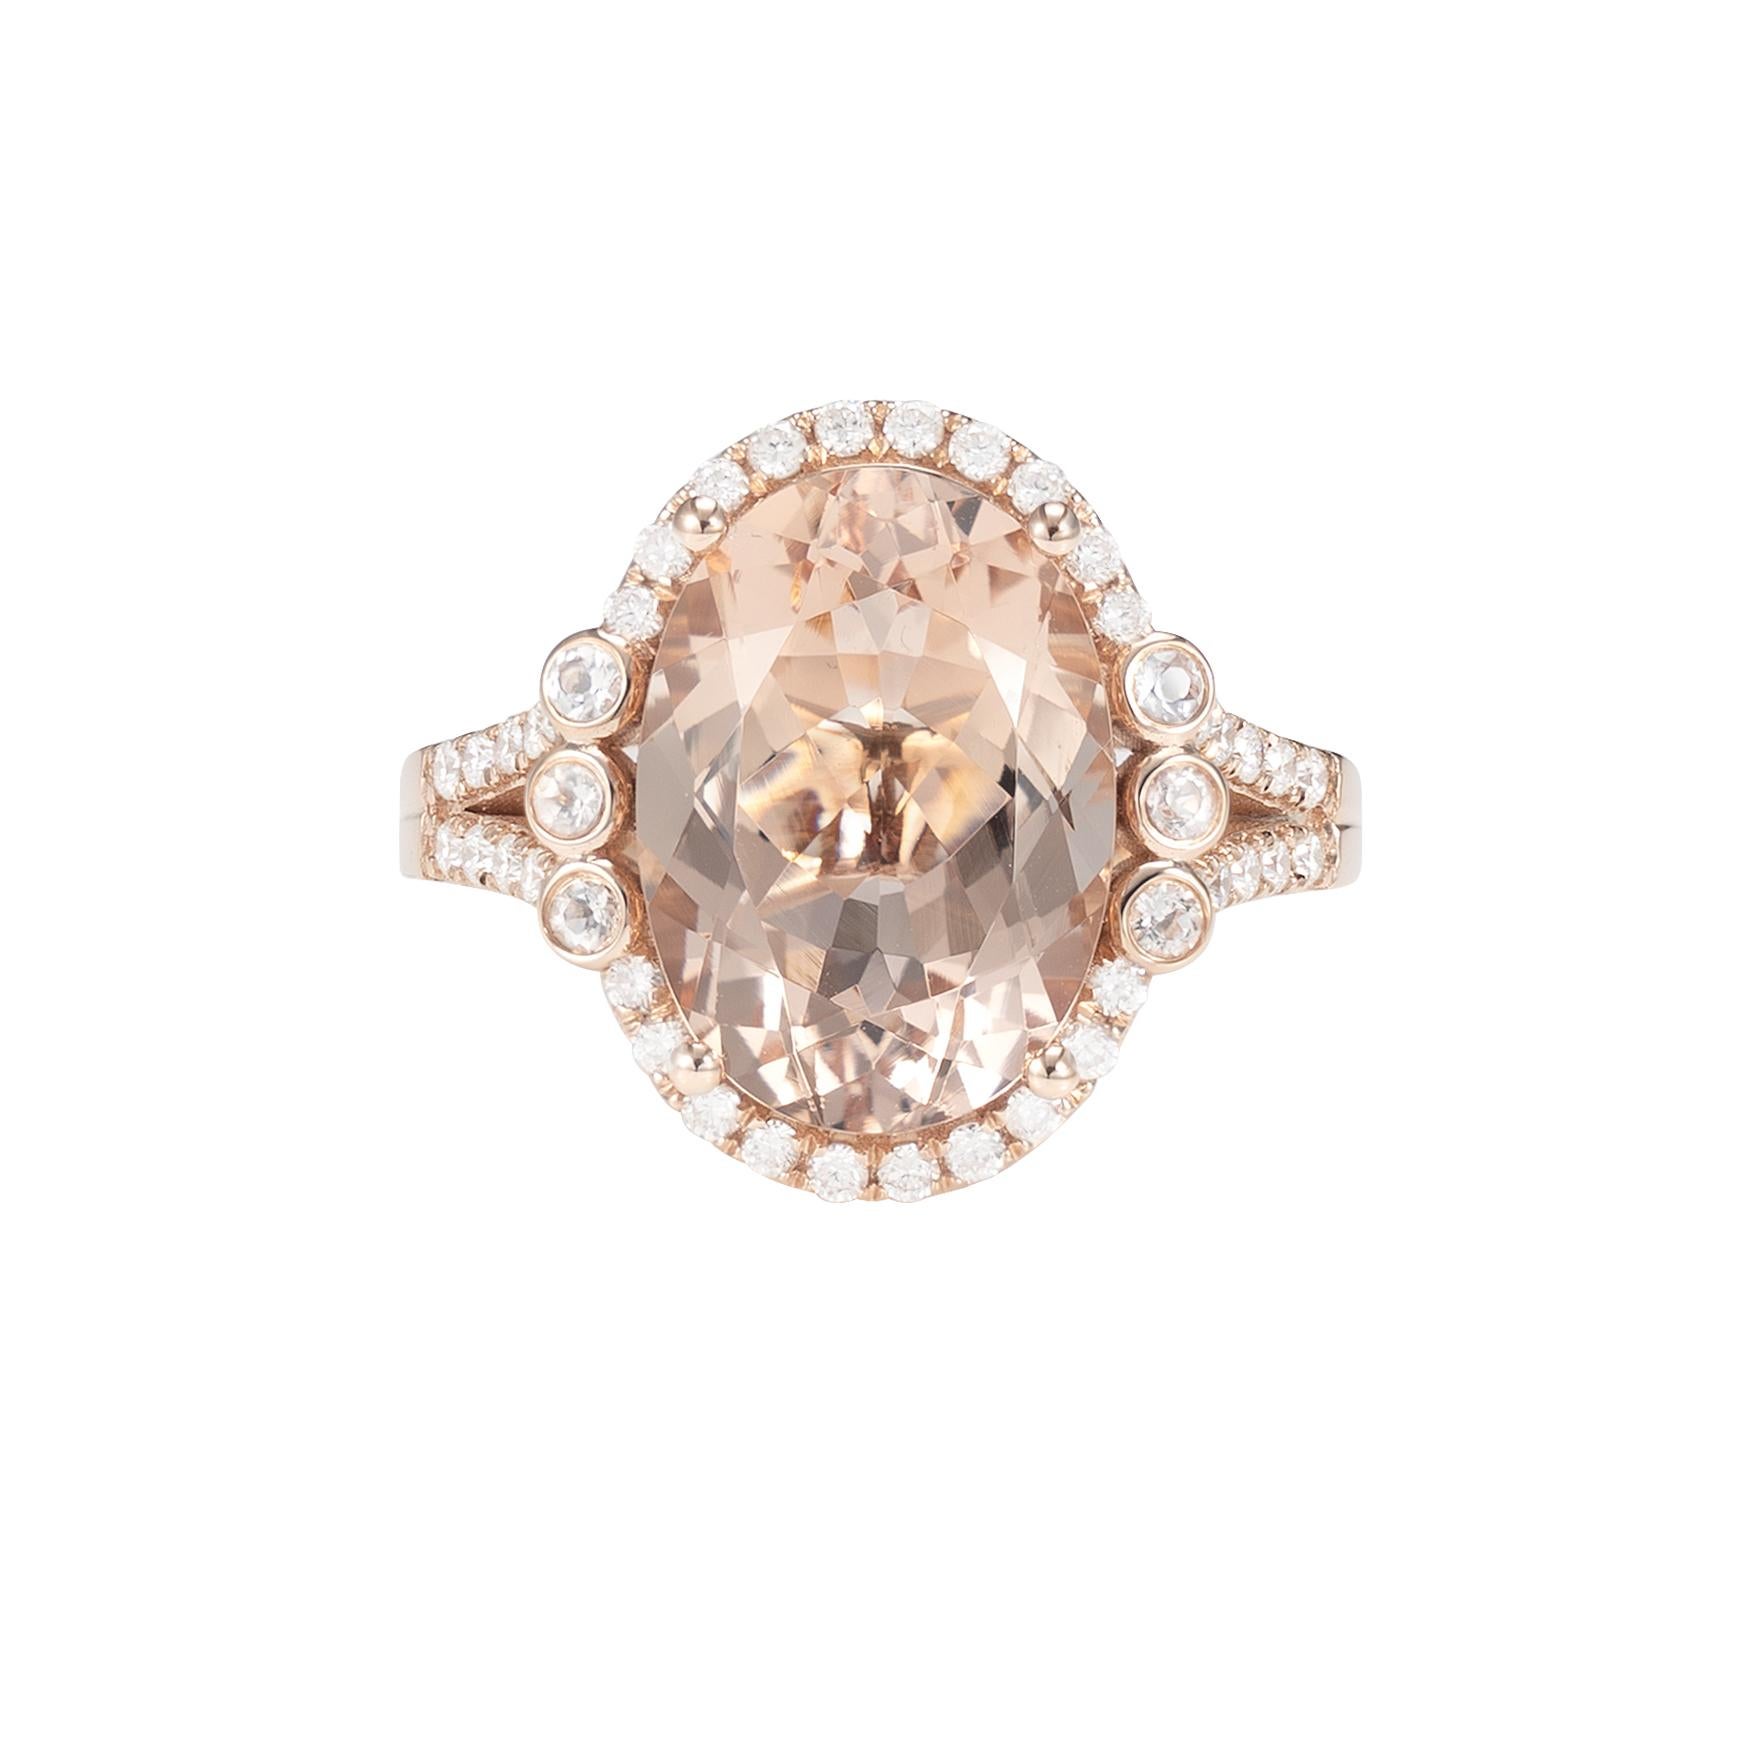 Contemporary 5.6 Carat Morganite and Diamond Ring in 18 Karat Rose Gold For Sale